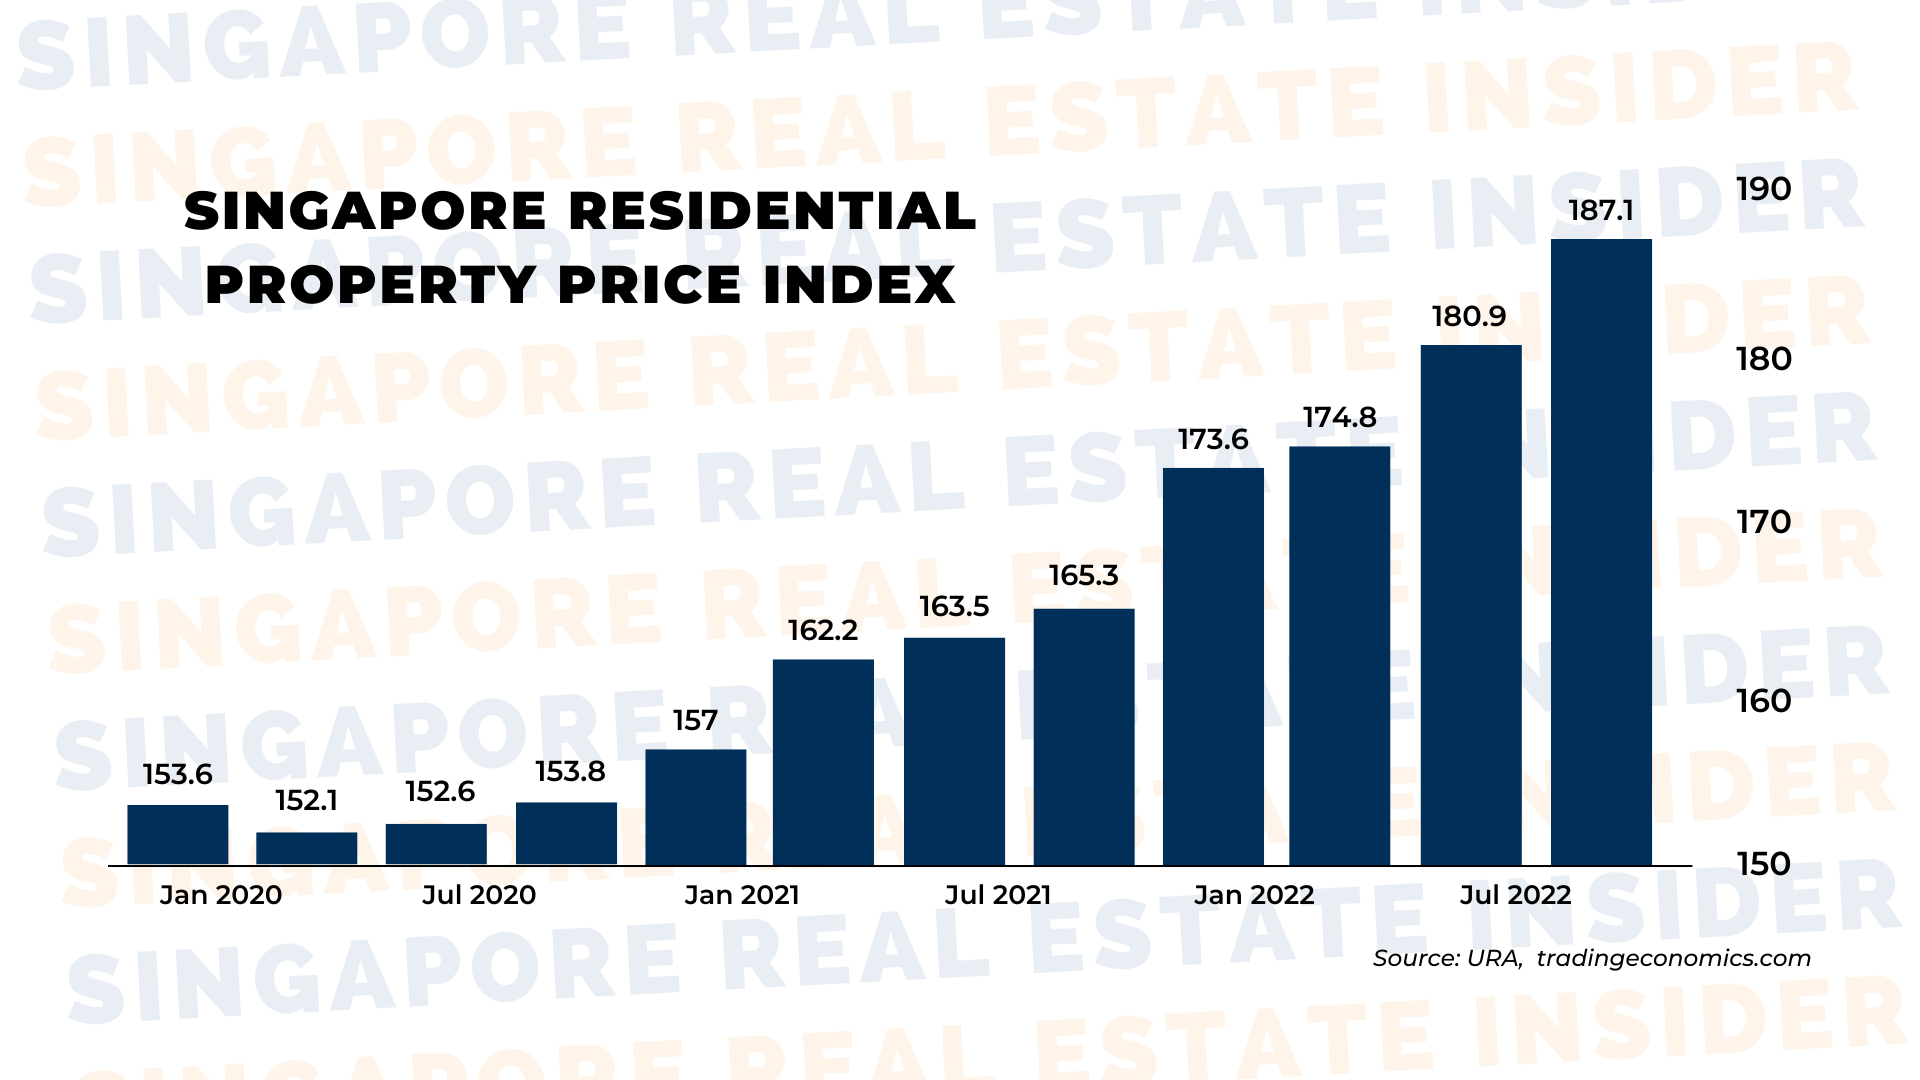 Singapore Residential Property Price Index